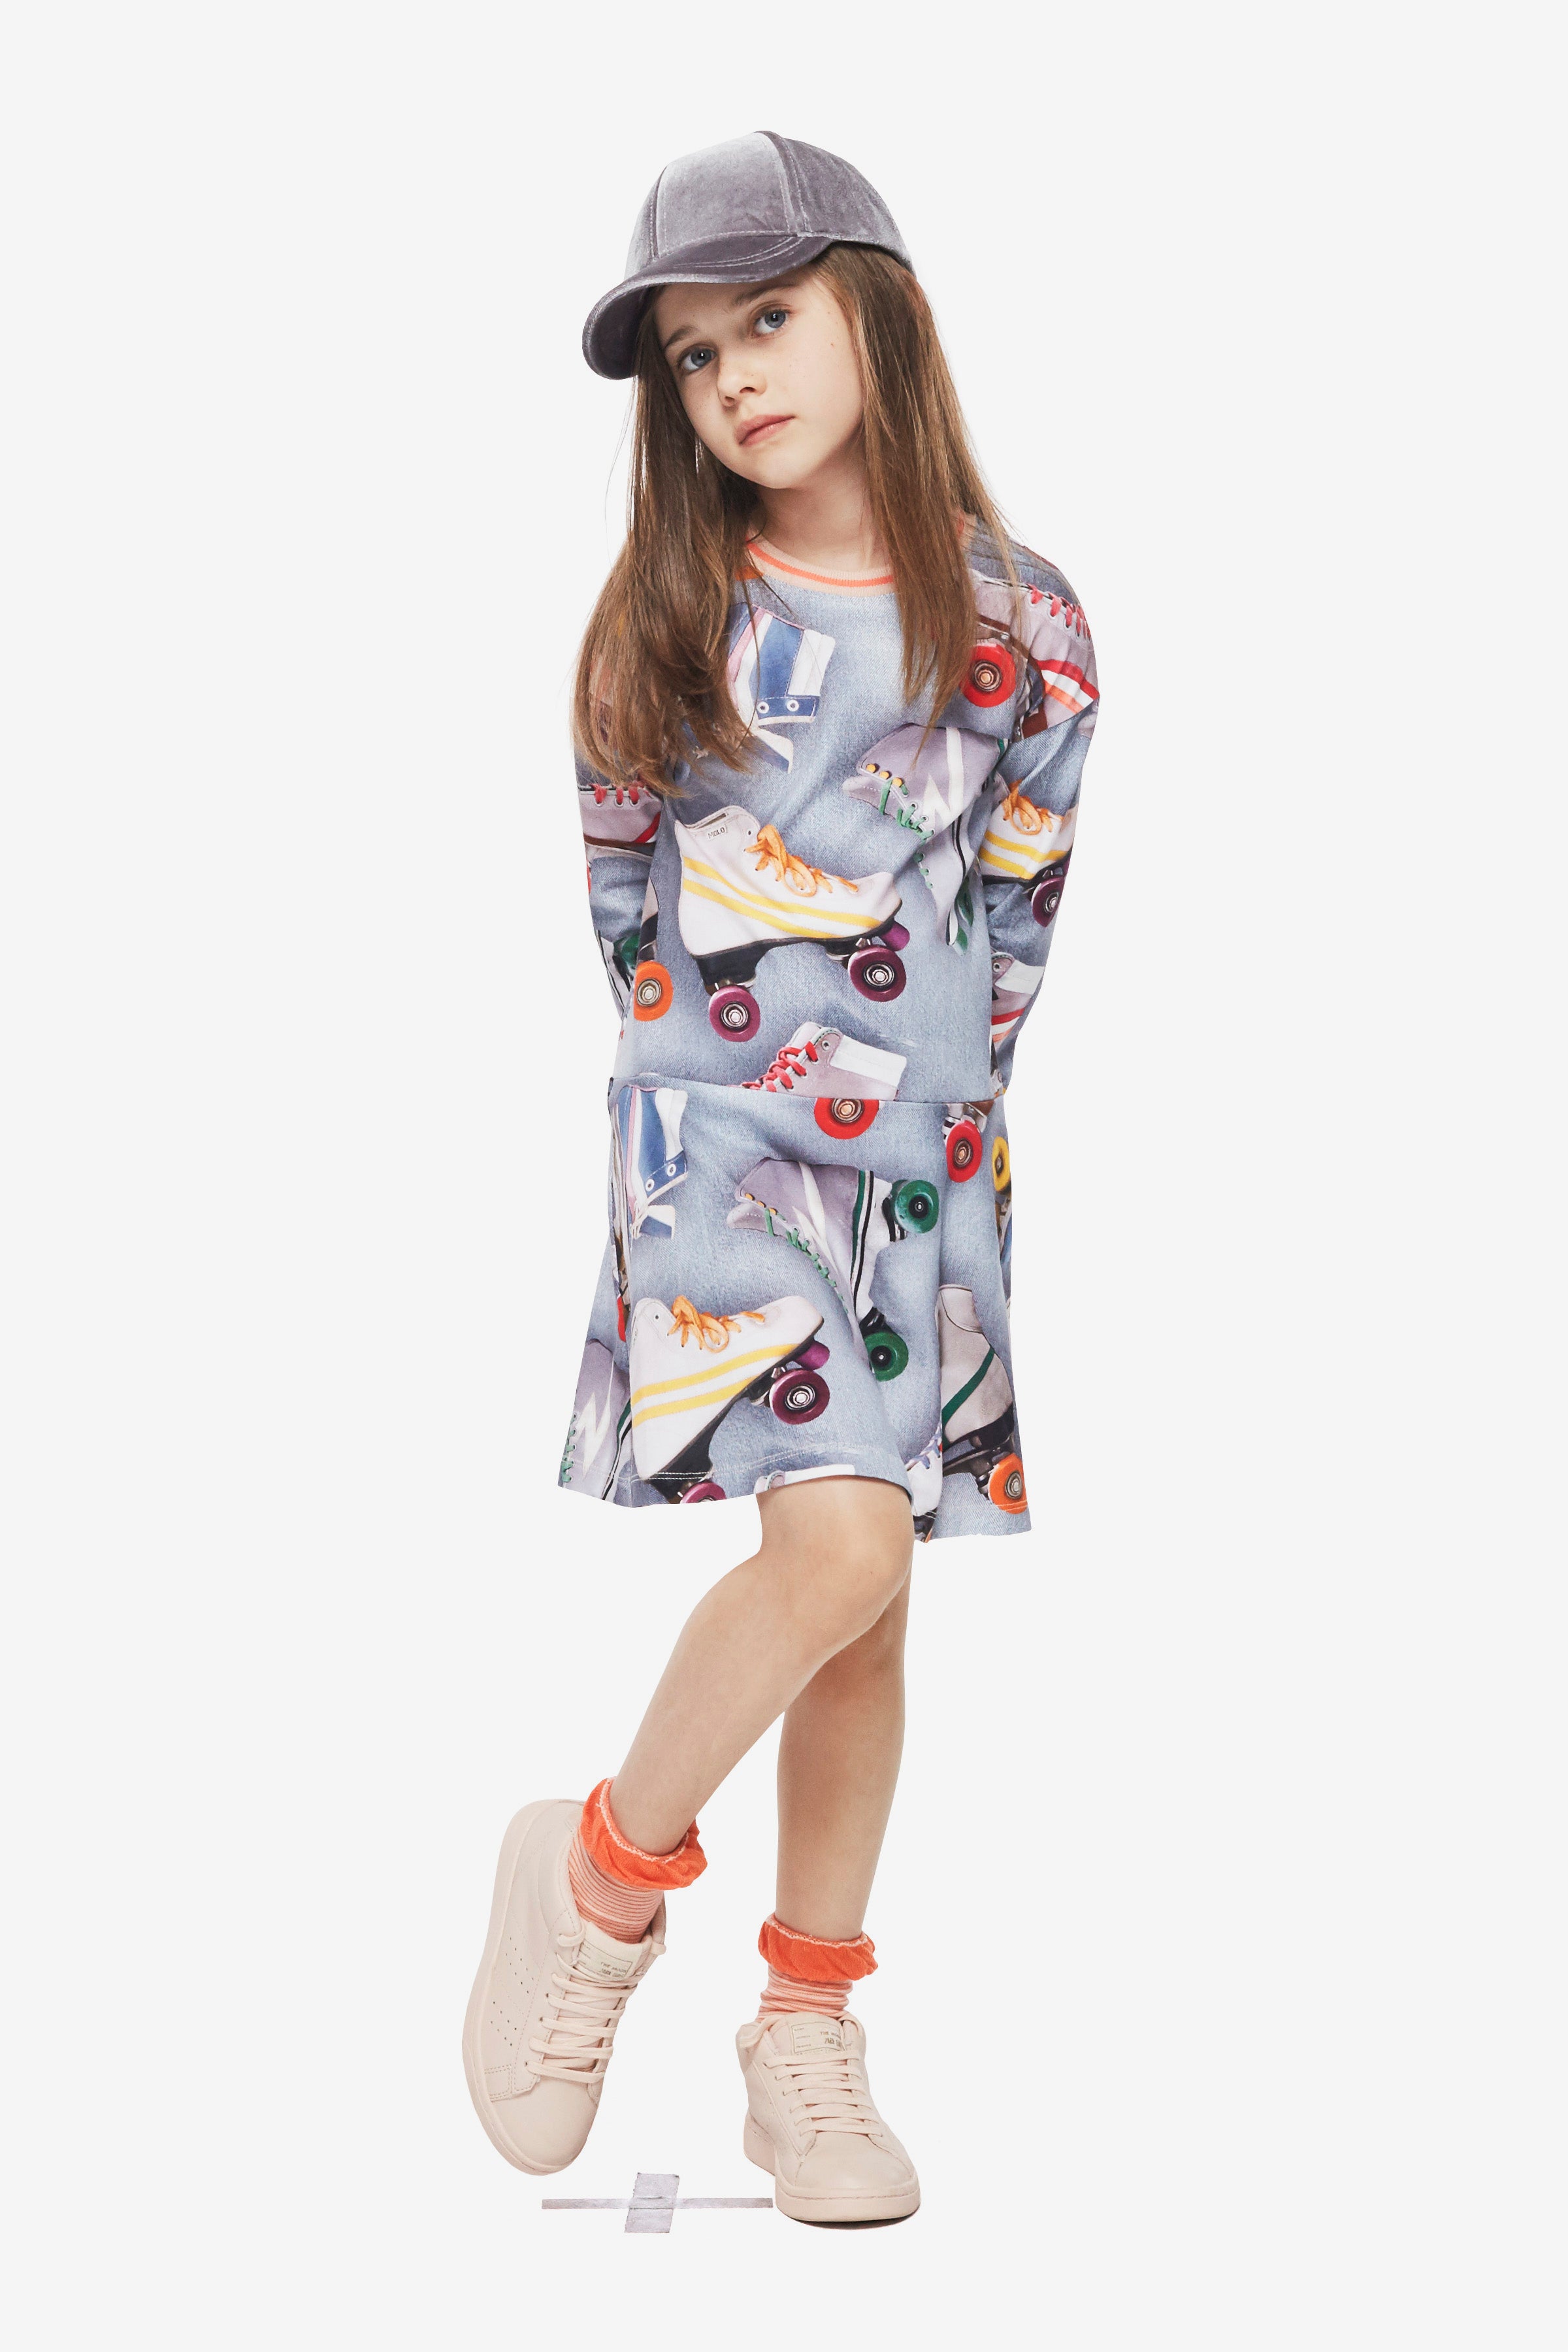 Girls Dresses by Boutique, Modern and Designer Kids Clothes Brands Page ...